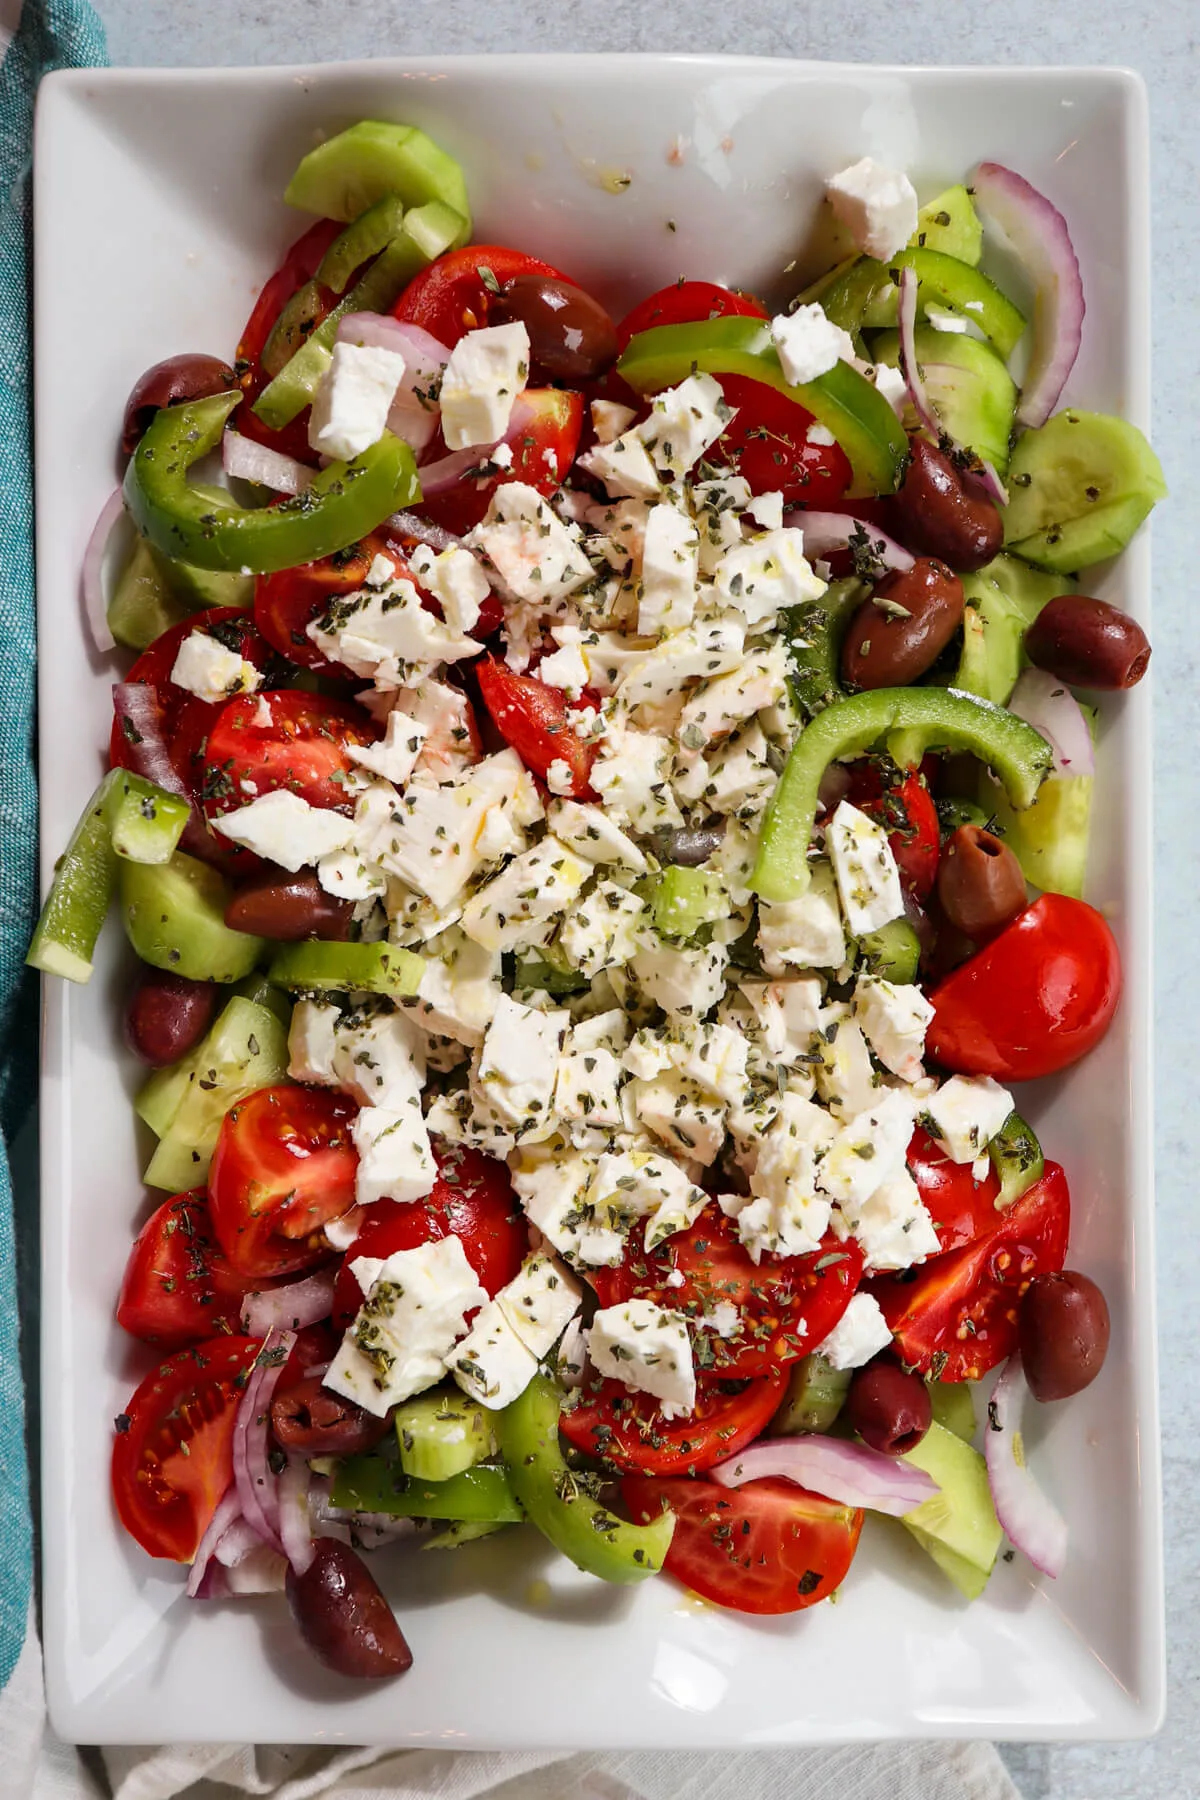 Overhead view of traditional Greek cucumber salad on a white serving dish with tomatoes, onions, olives, etc. and topped with crumbled feta cheese.